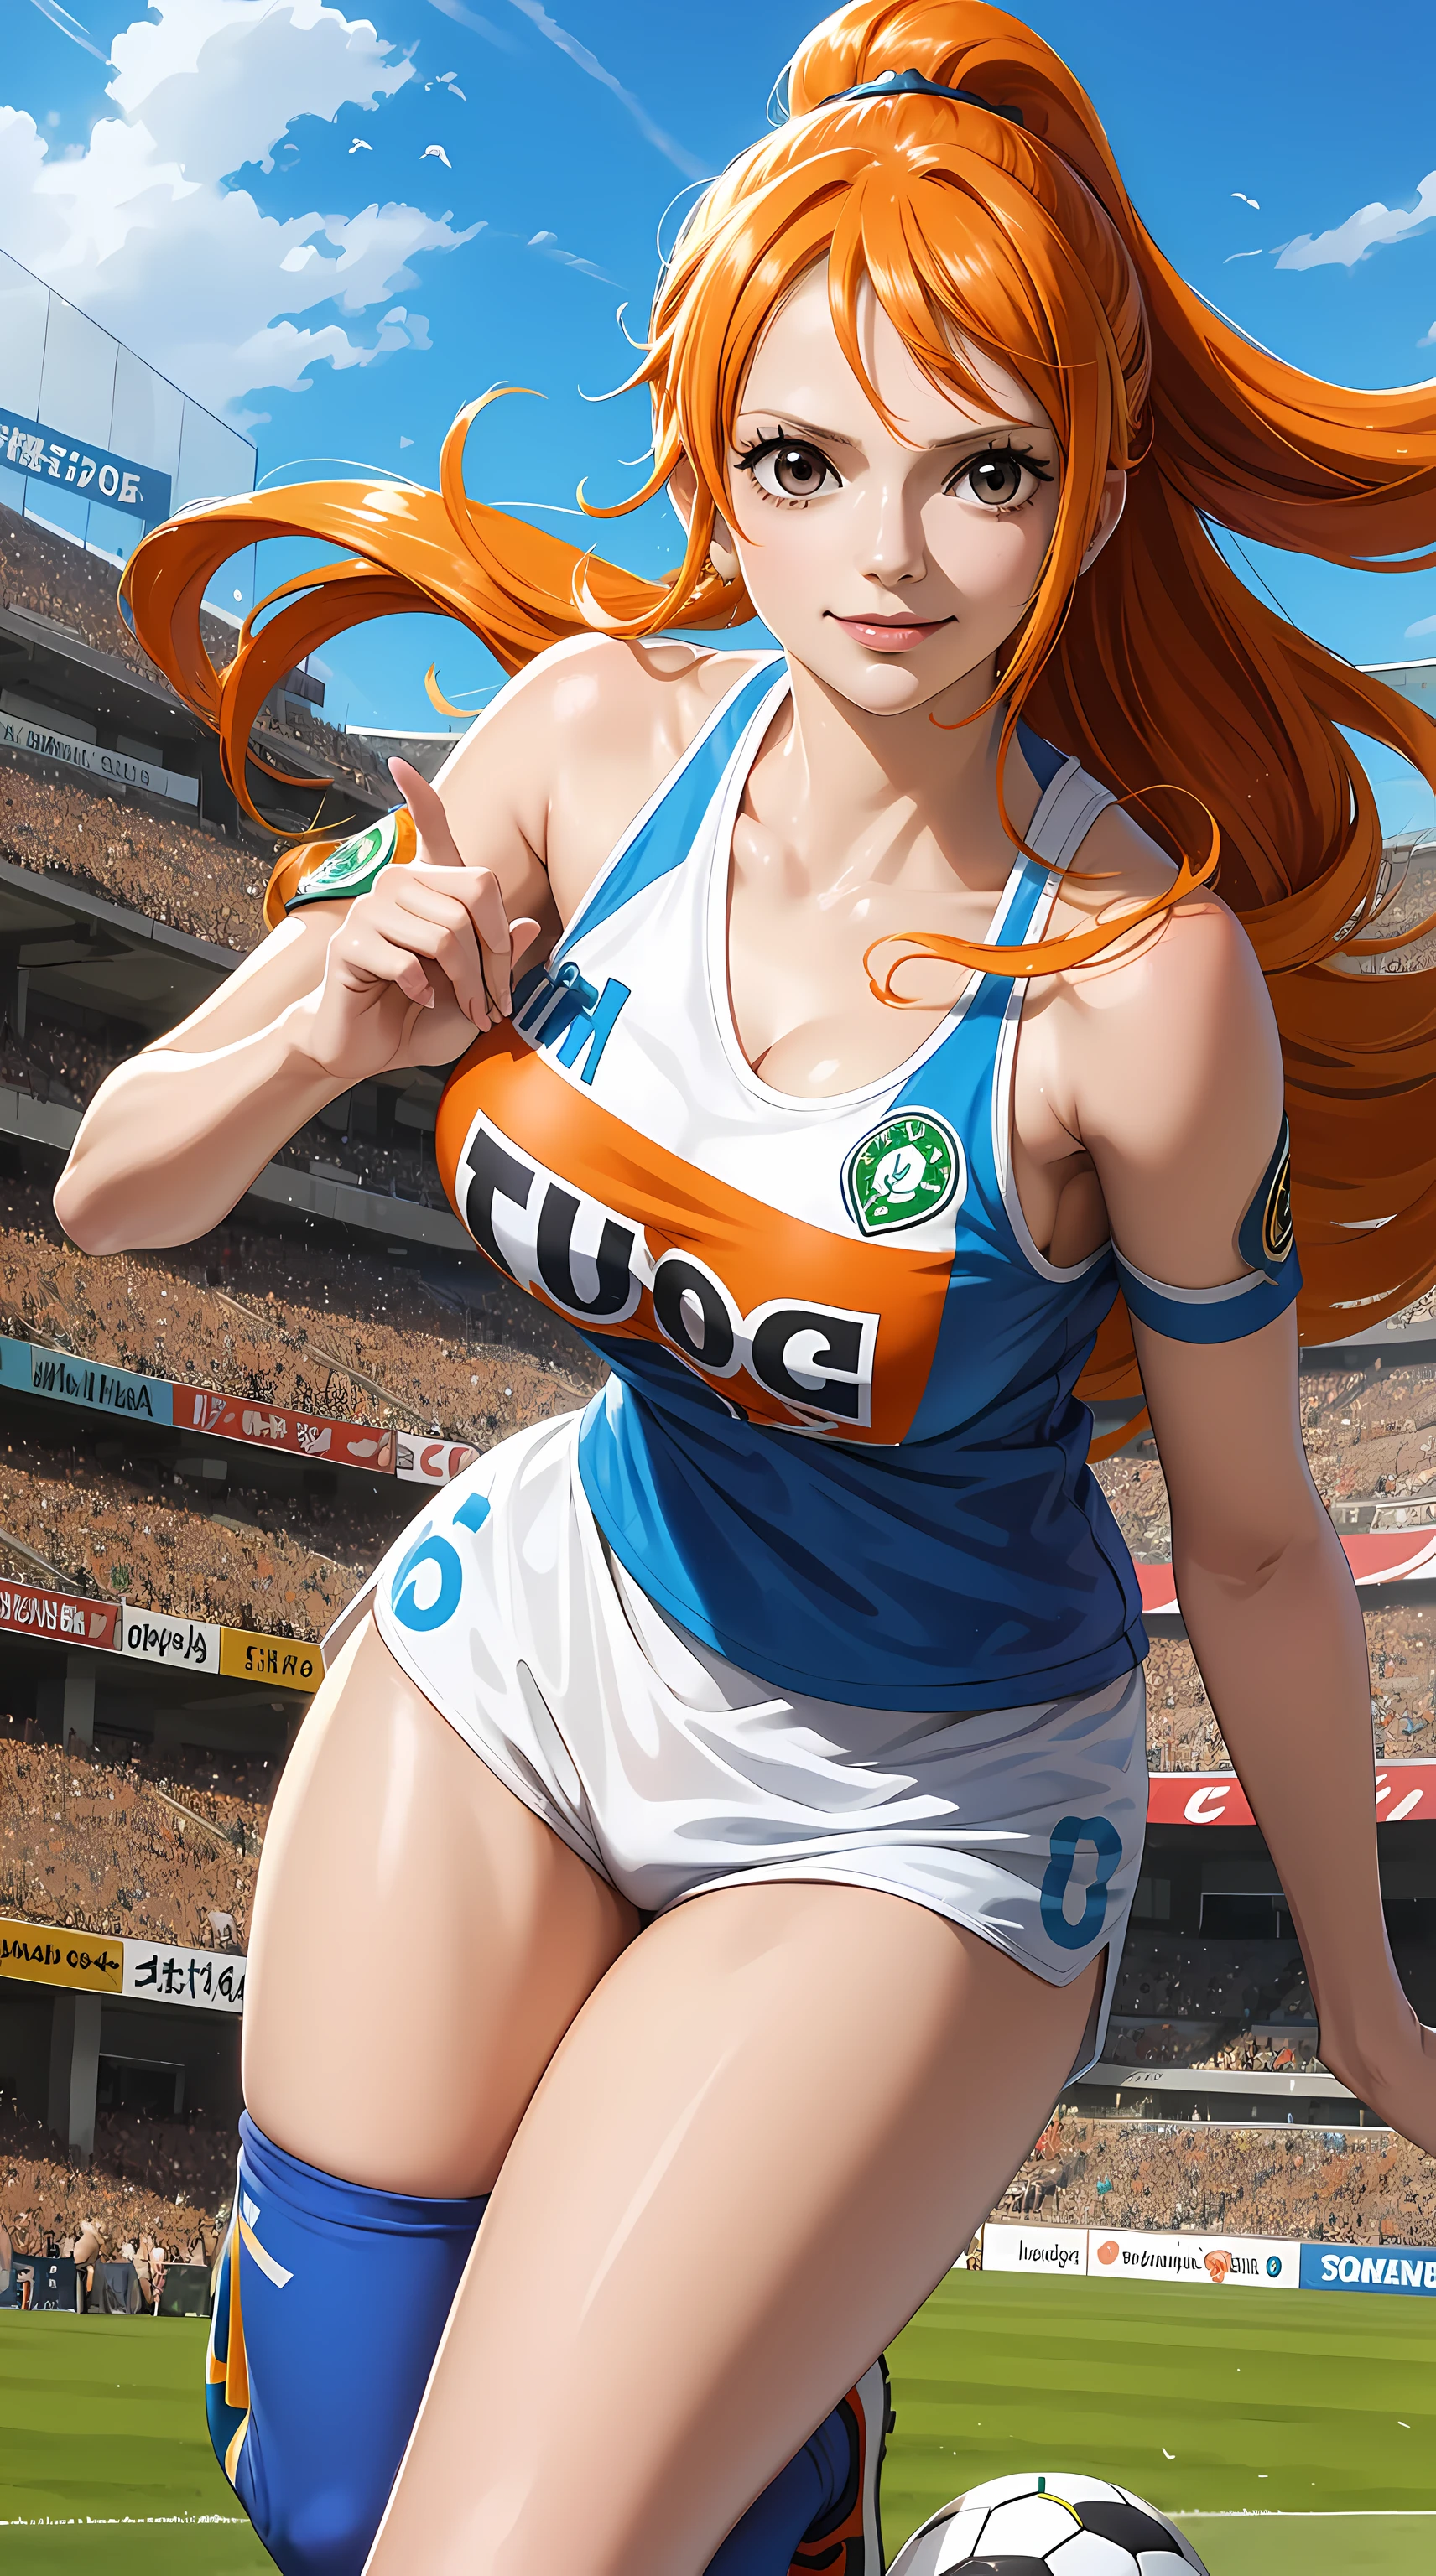 NamiFinal, nami from the anime one piece, long hair, orange hair, bangs, ponytail, beautiful woman, beautiful, perfect body, perfect breasts, wearing a soccer jersey, soccer pants, soccer shoes, in the middle of the soccer field, look at the audience, little smile, realism, masterpiece, textured skin, super detailed, high detail, high quality, best quality, 1080p, 16k